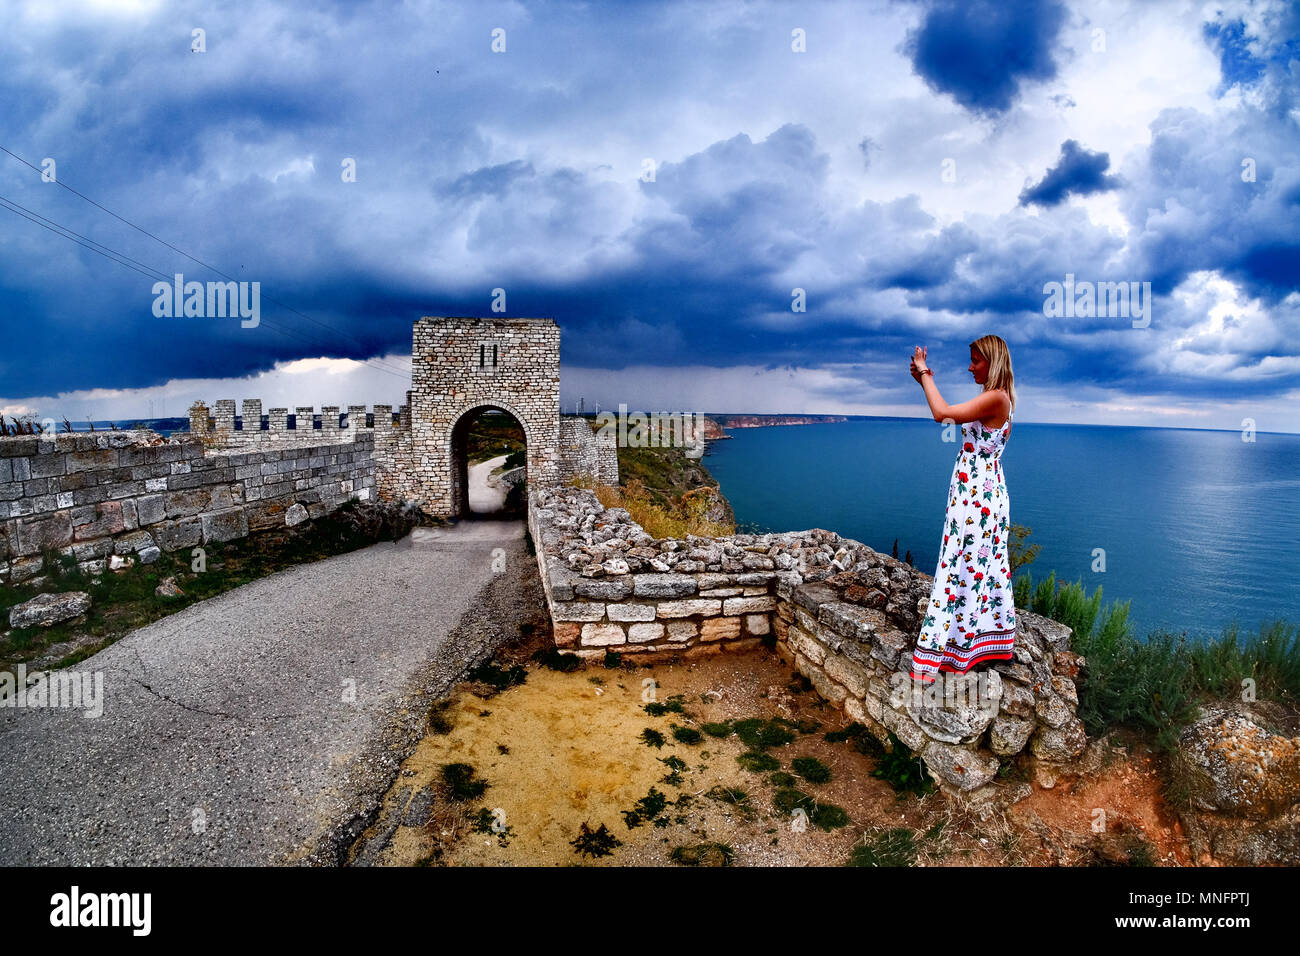 Woman taking pictures at Cape Kaliakra, Bulgaria, Black Sea. Old abandoned fortress by the sea. Stock Photo